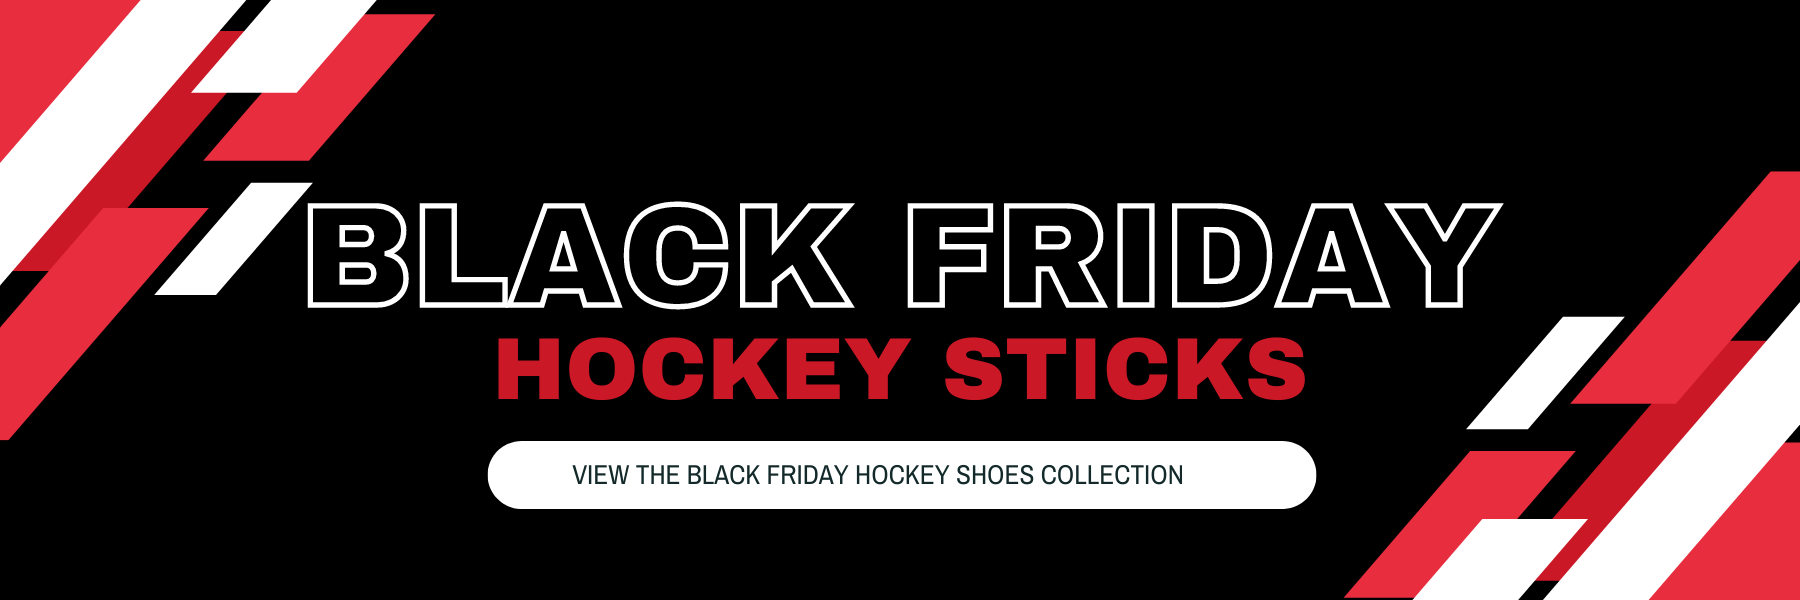 Black Friday Stick Collection